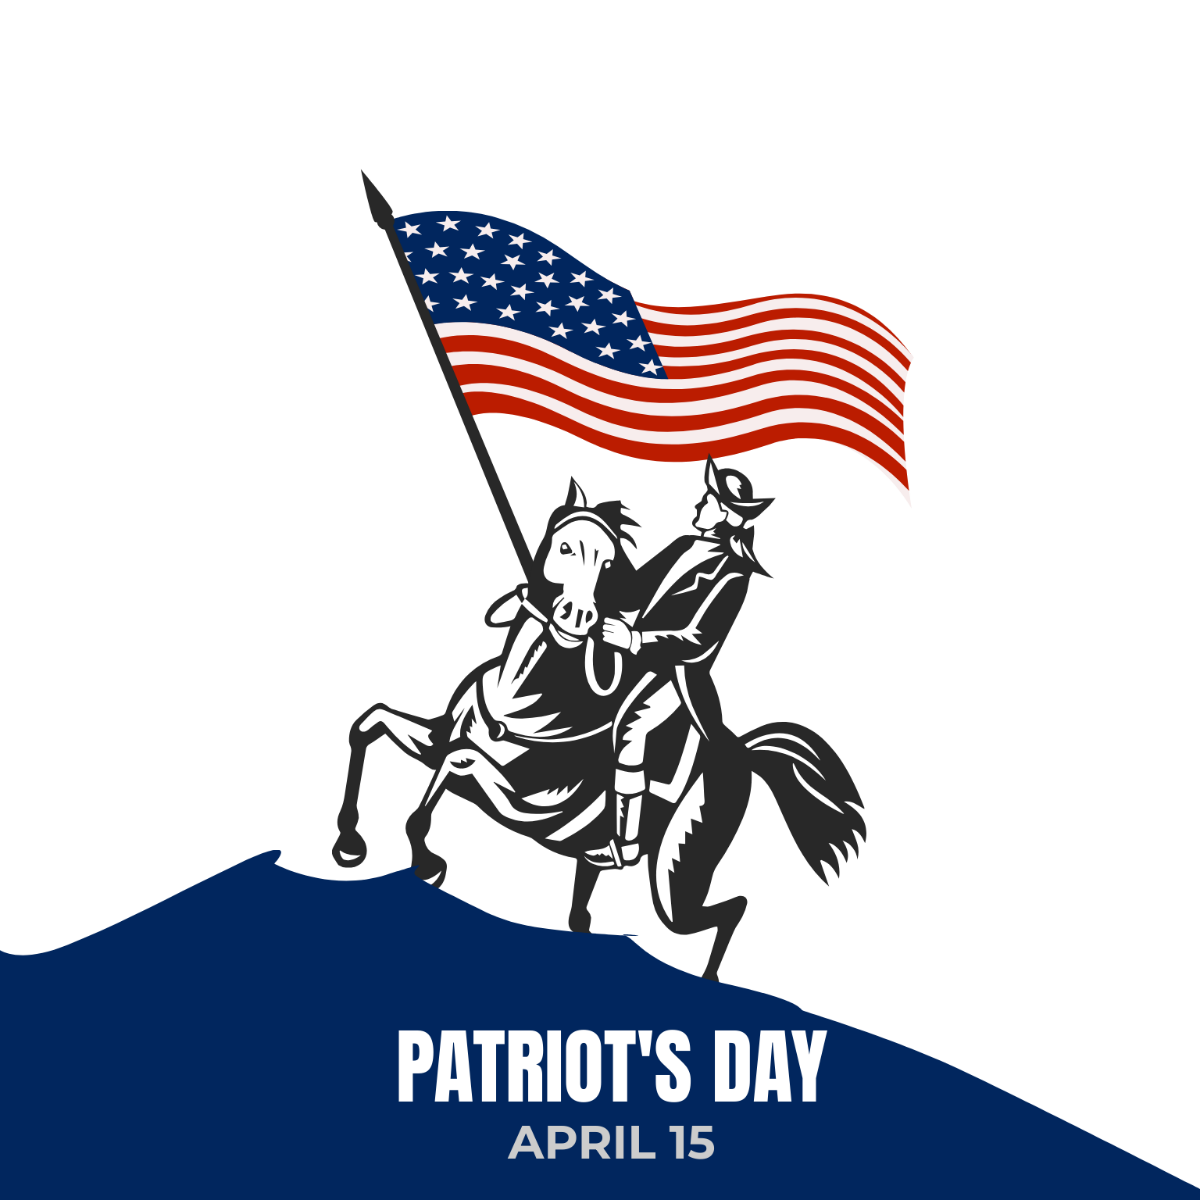 Free Patriot's Day Clipart Template